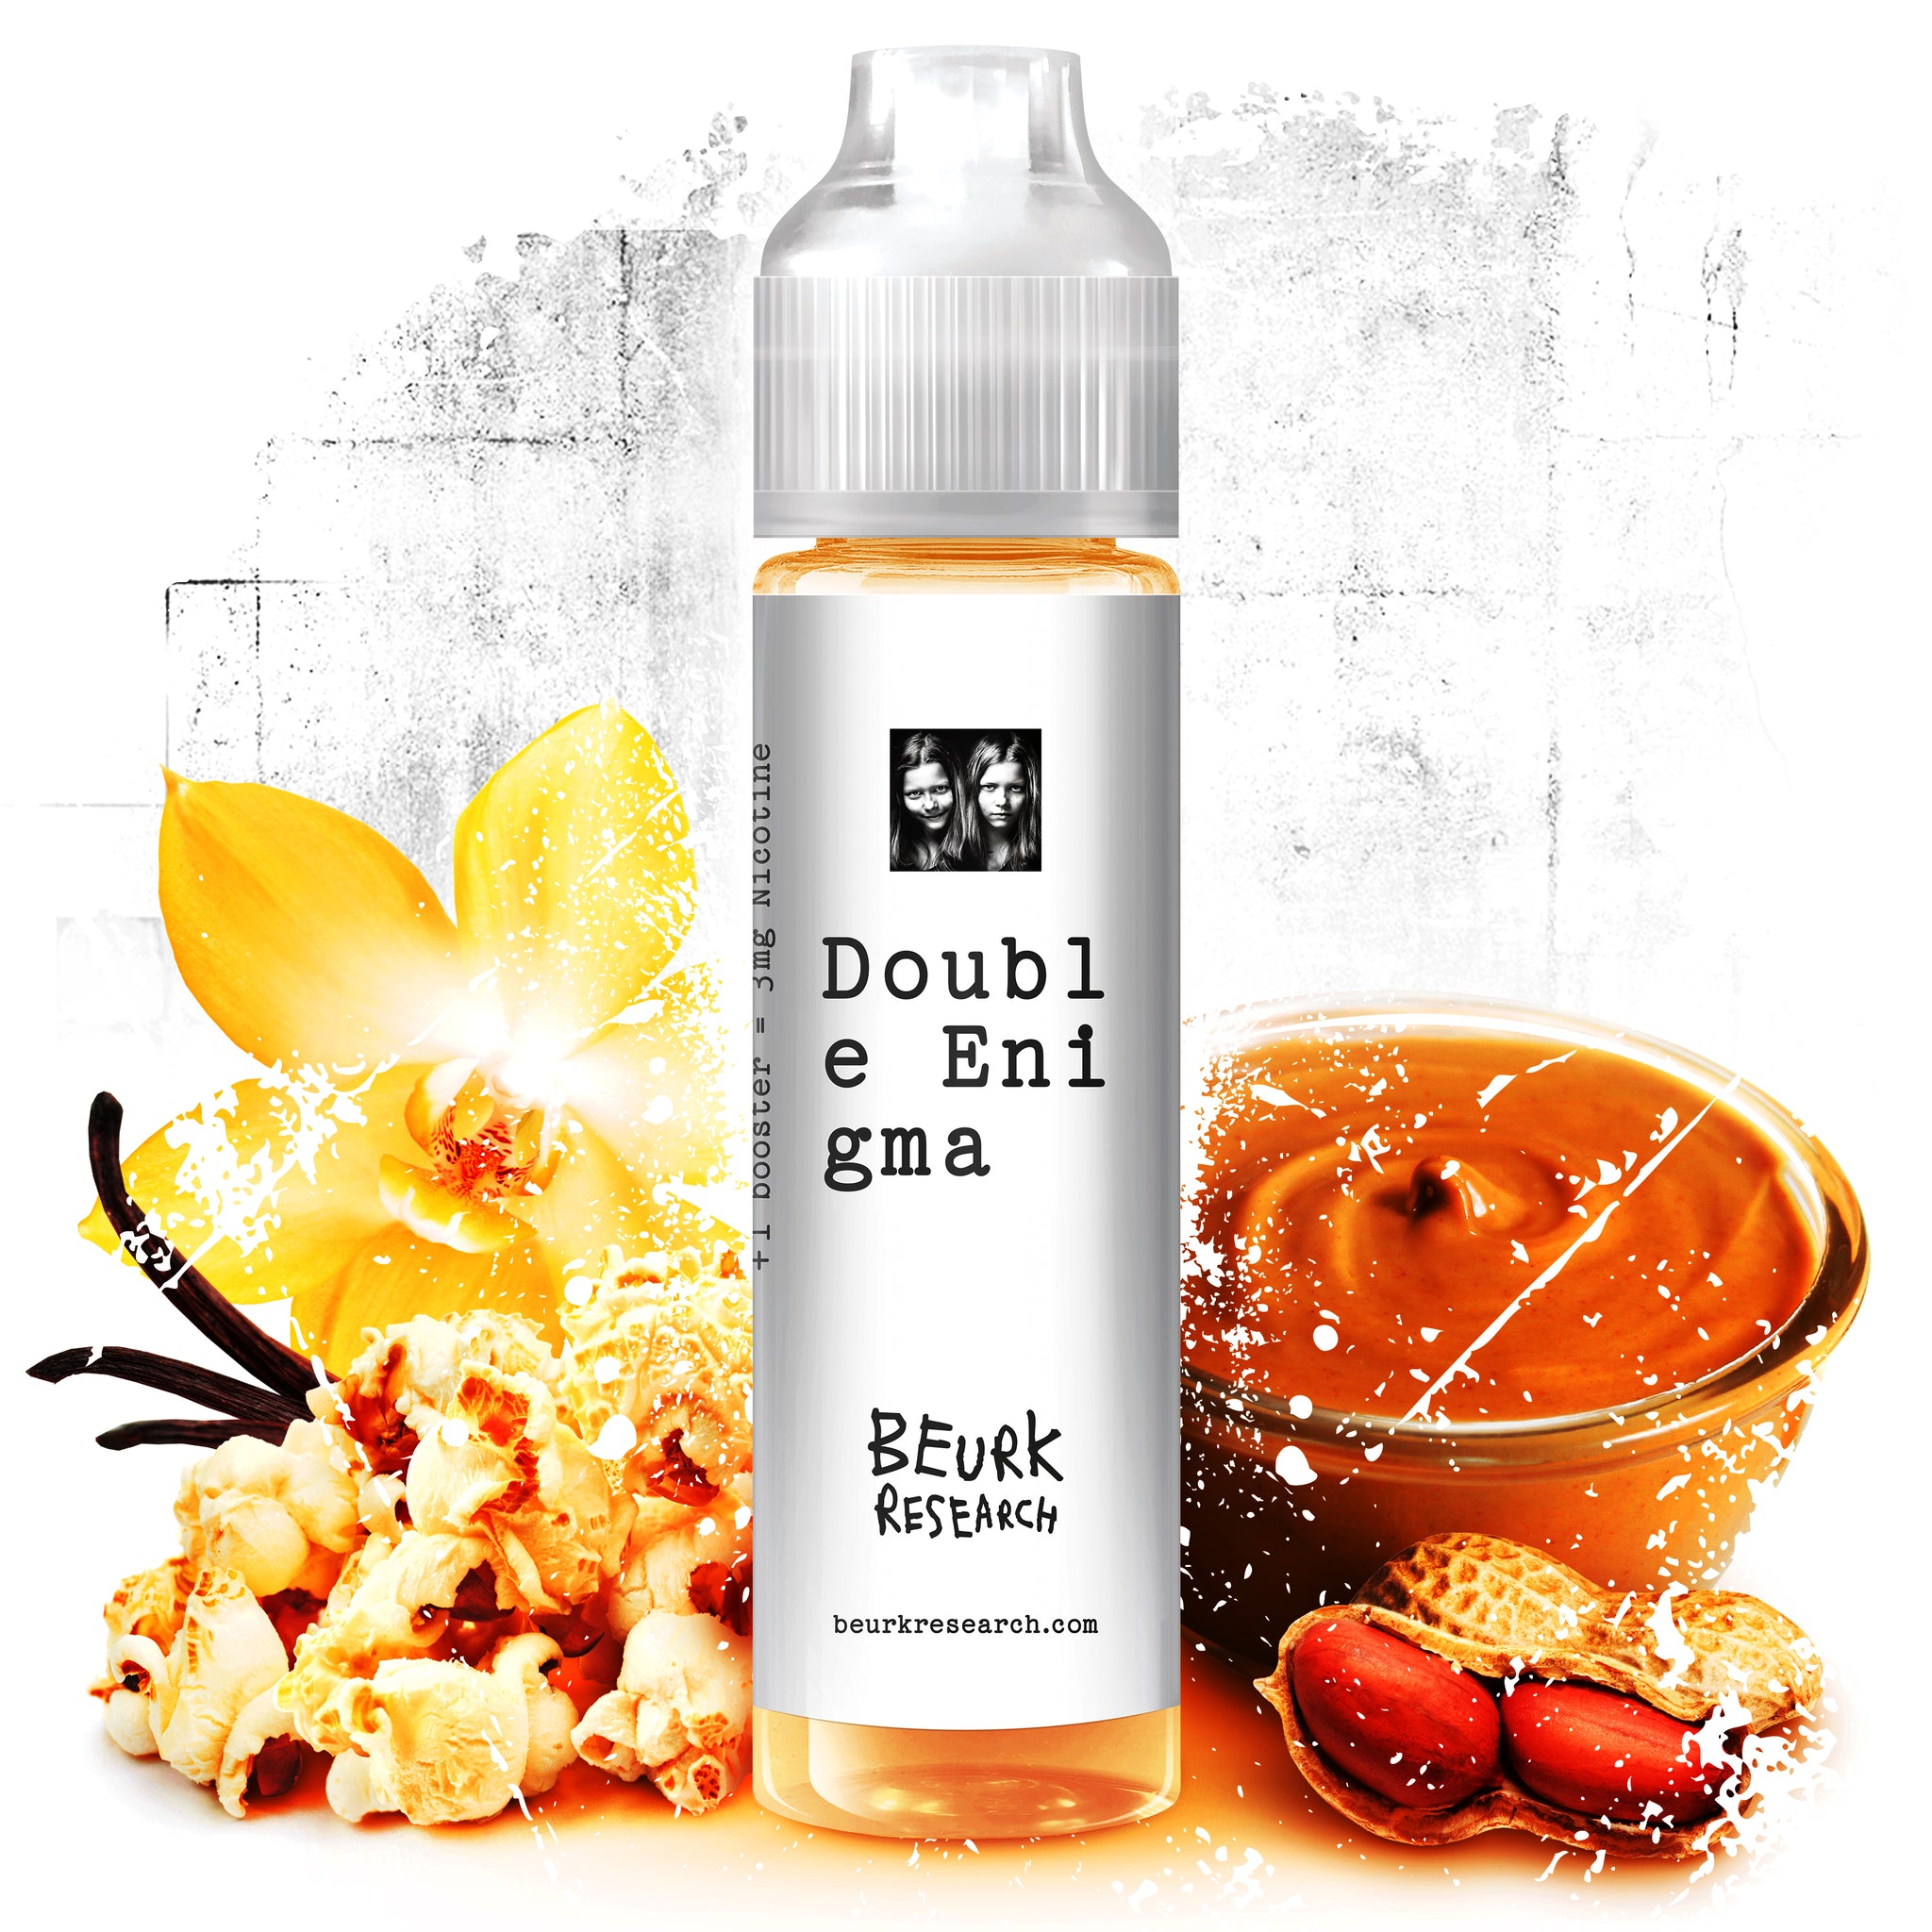 Double Enigma - Beurk Research - 40 ml